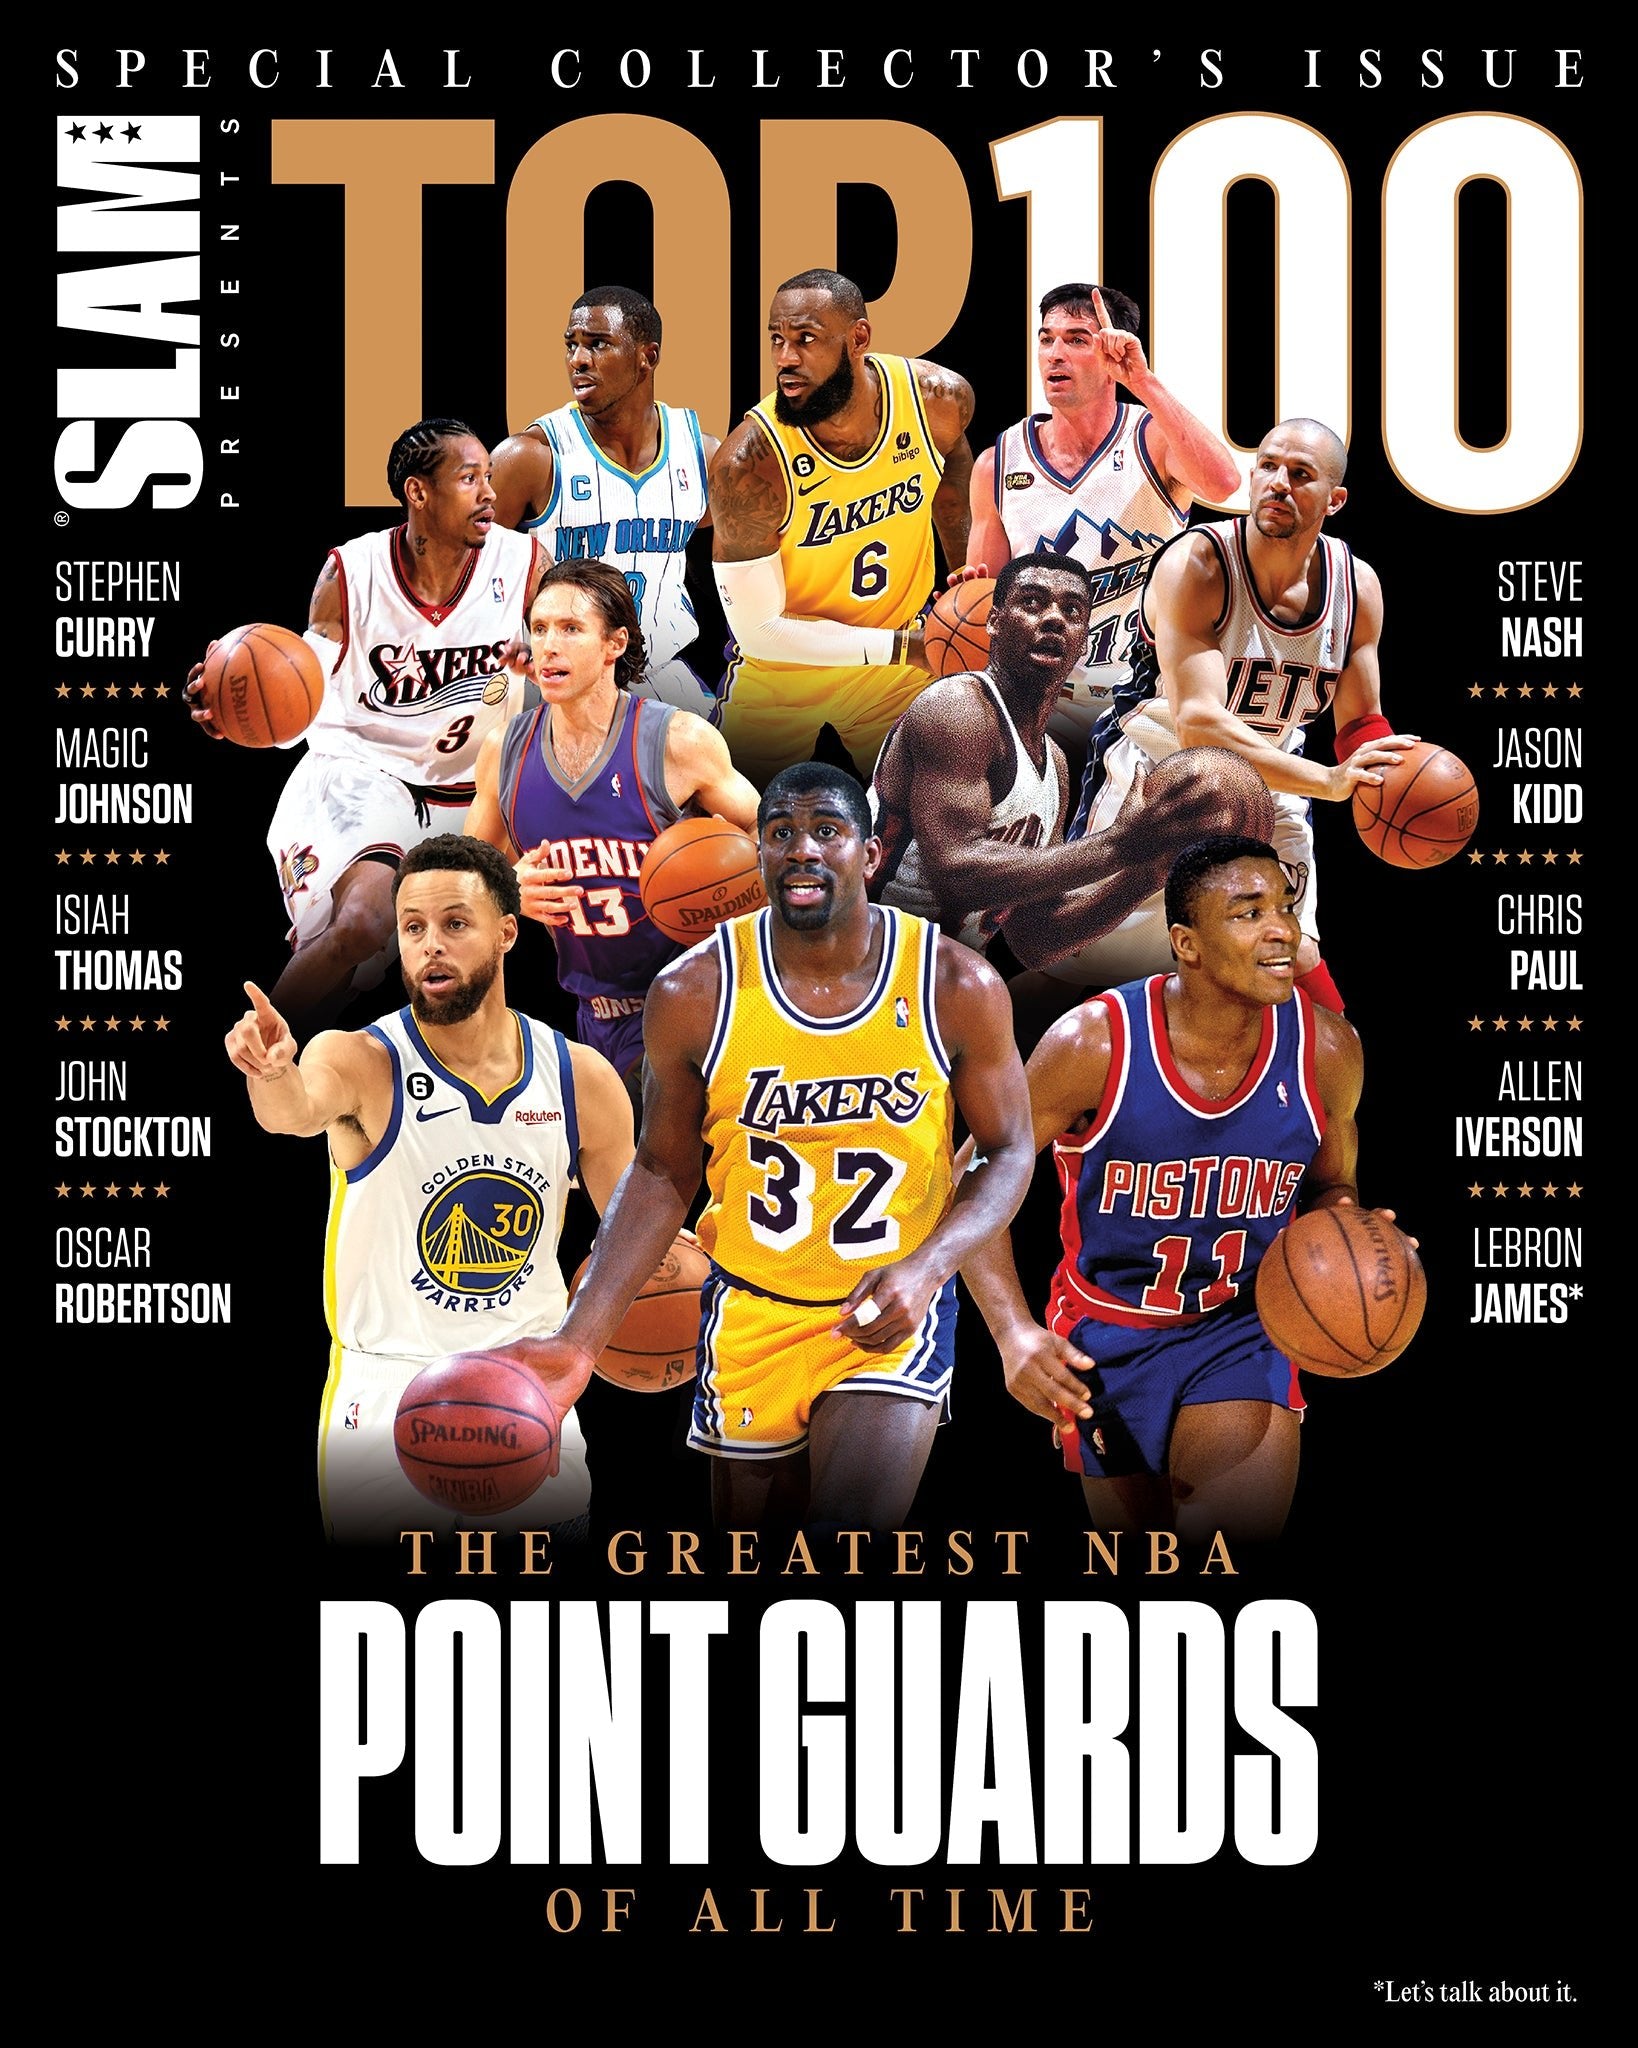 SLAM's Top 100 Players Of All-Time: 100-51